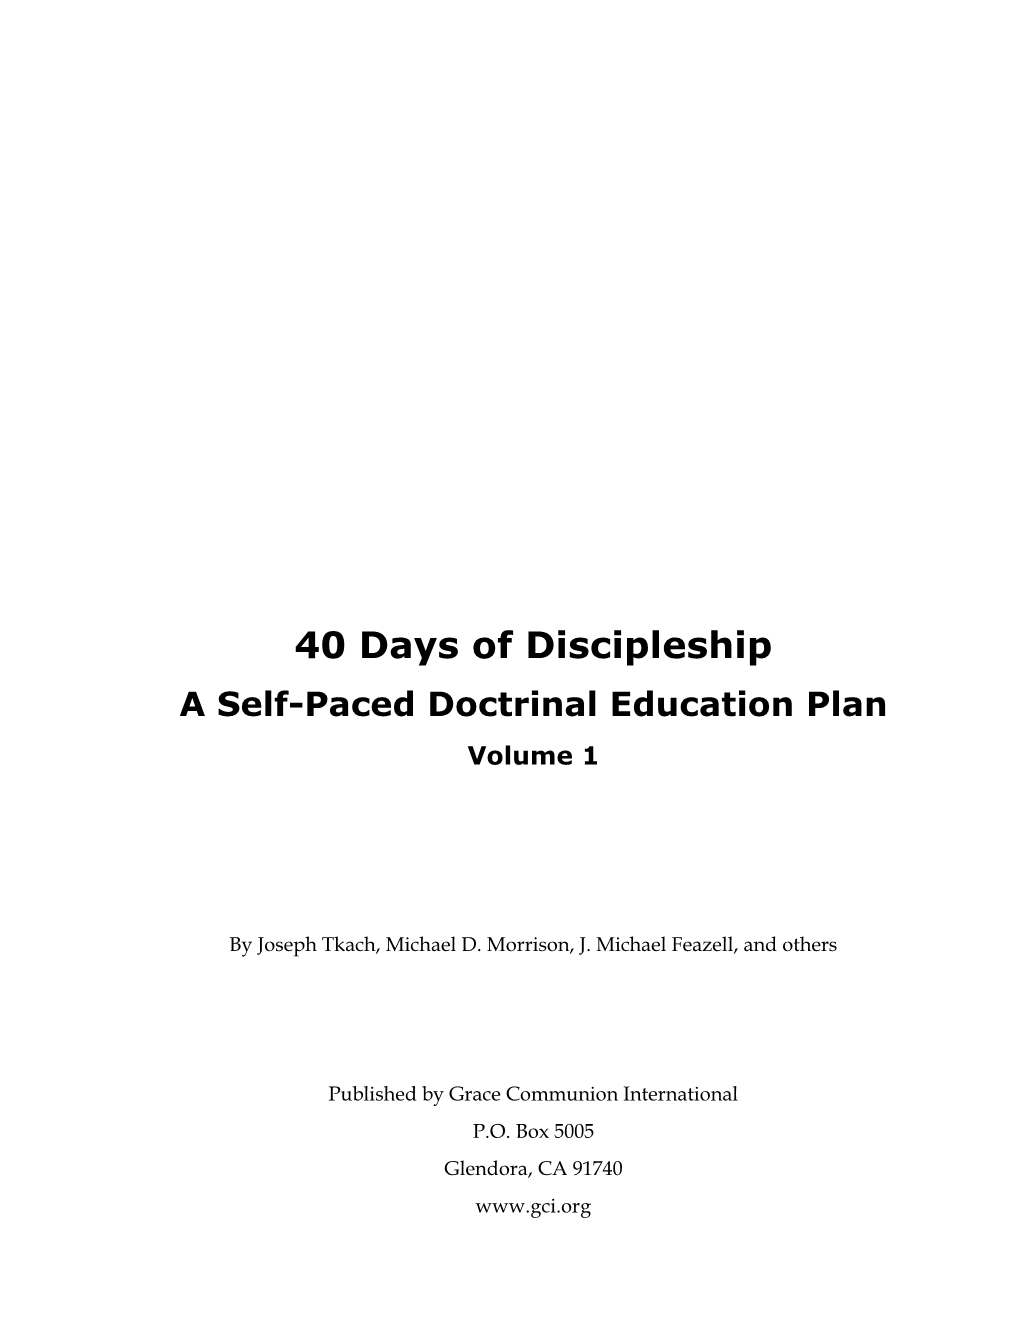 40 Days of Discipleship a Self-Paced Doctrinal Education Plan Volume 1